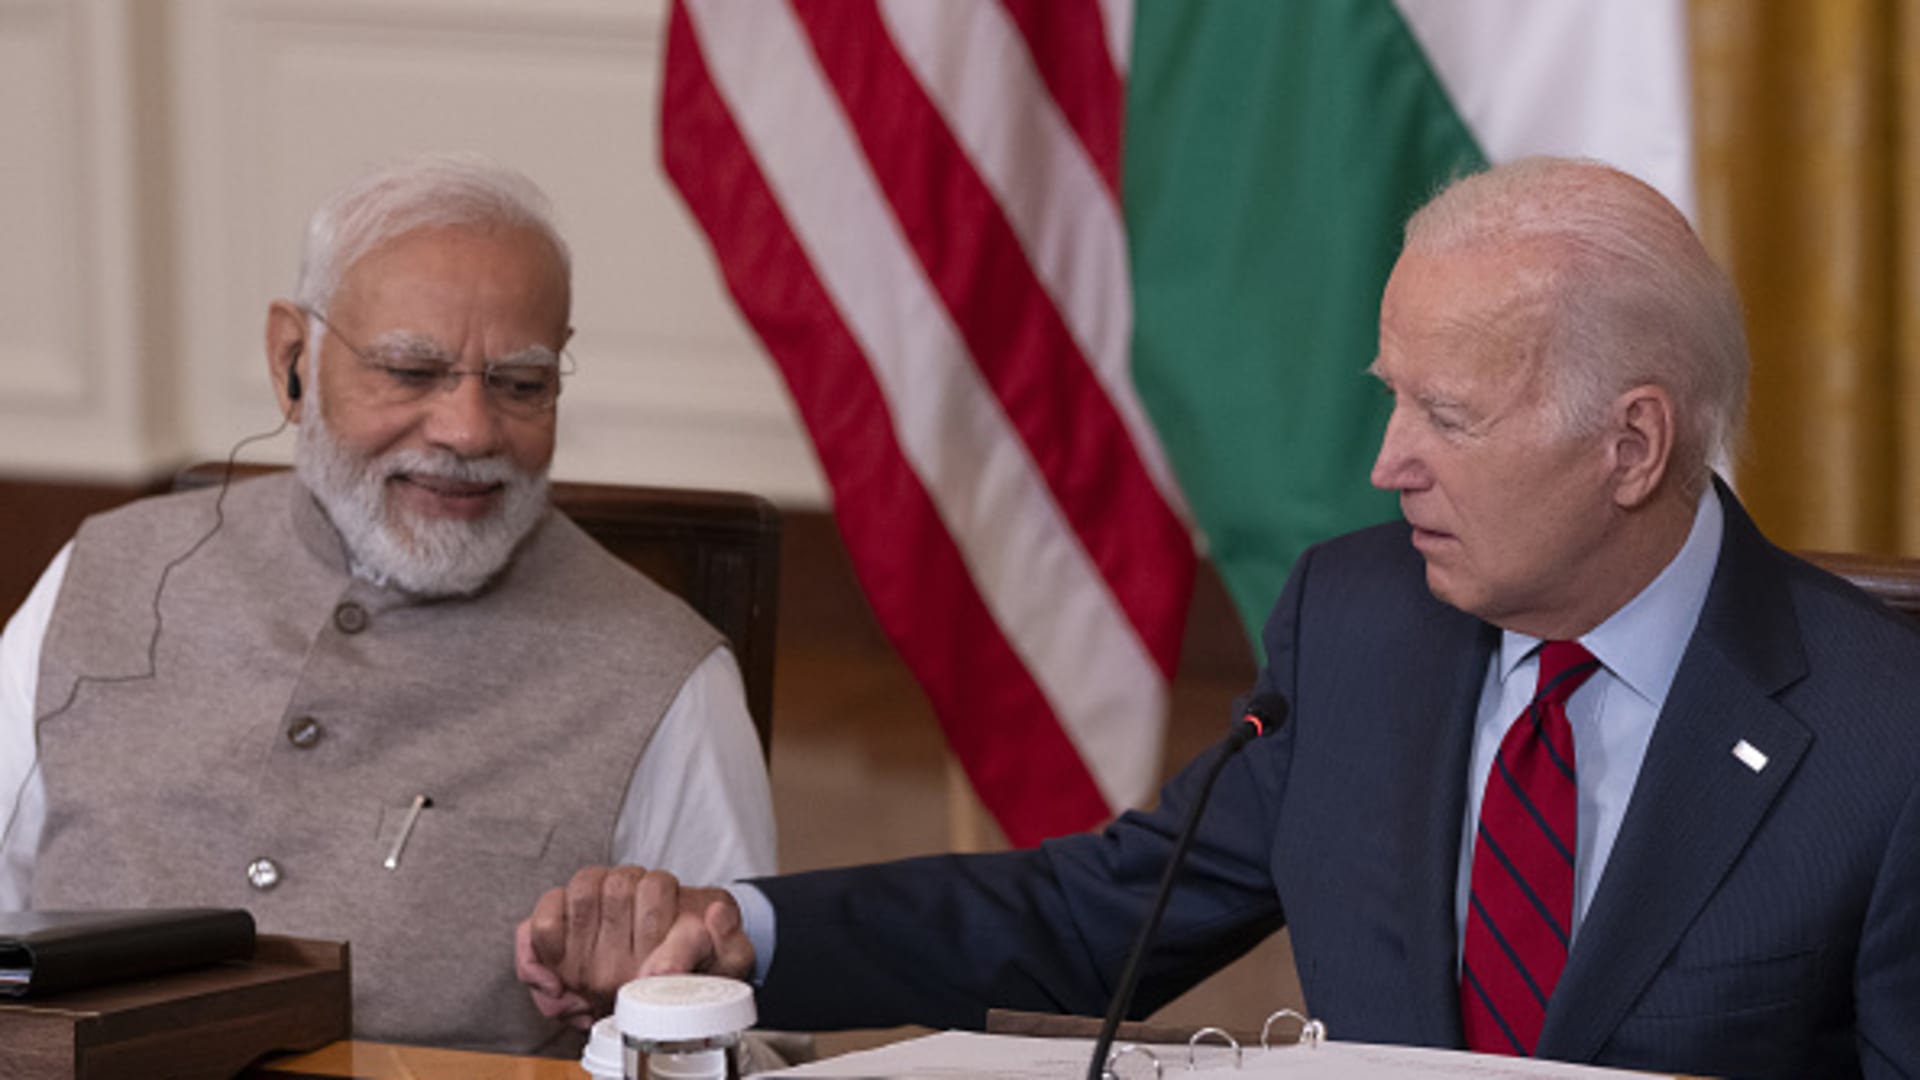 India's 'freedom' takes precedence over being a U.S. ally, says think tank 